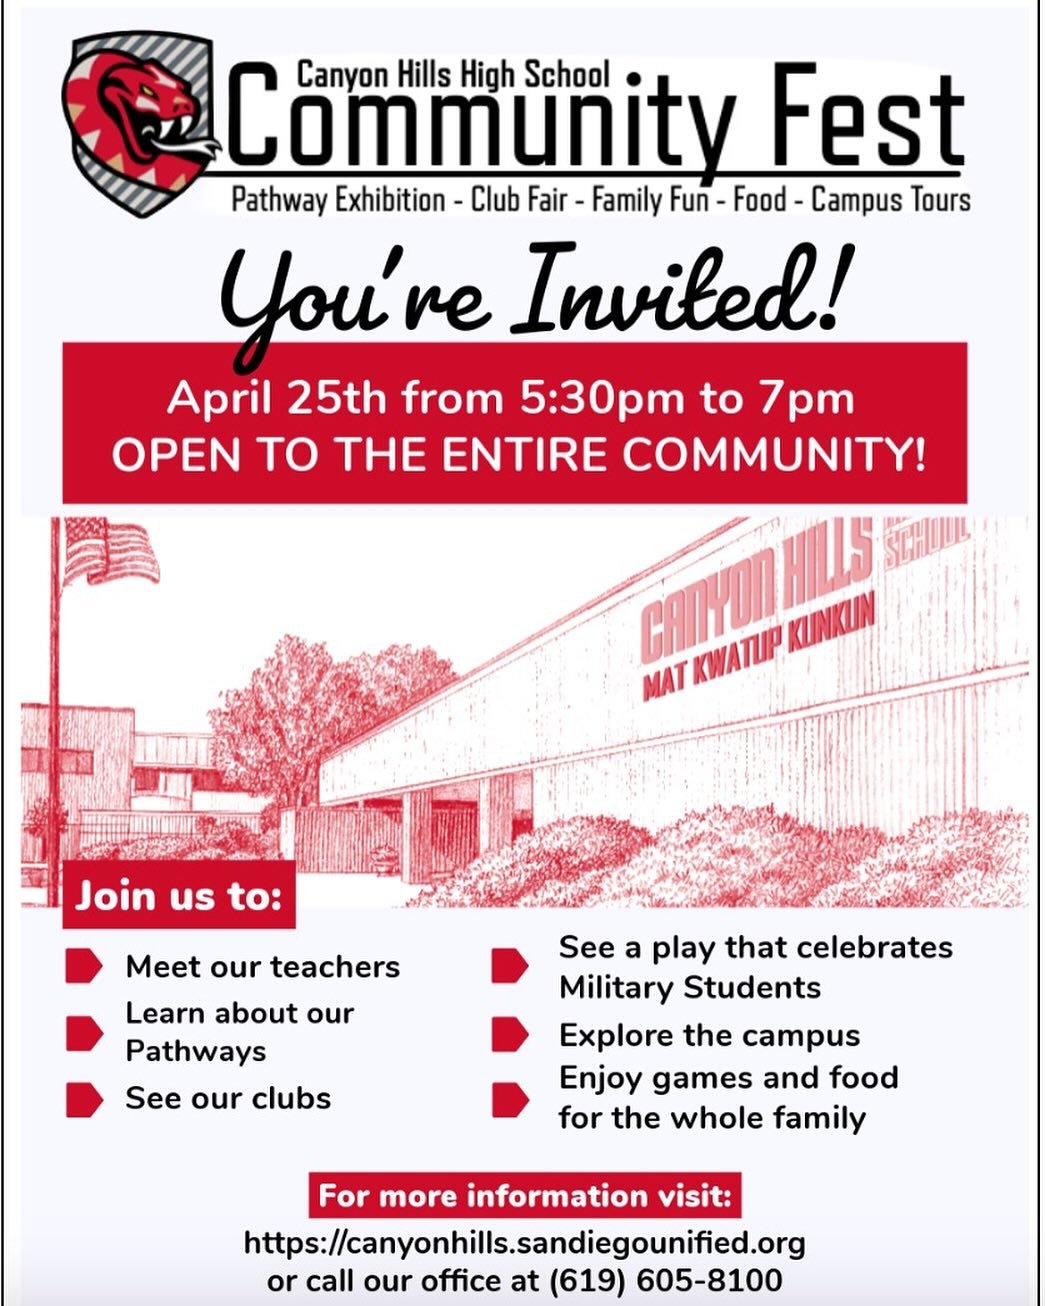 Canyon Hills High is hosting a community fest! Open to everyone! It has been especially geared toward the littlest for some family fun! Or come if you&rsquo;re a middle schooler and future student to see what they have to offer!